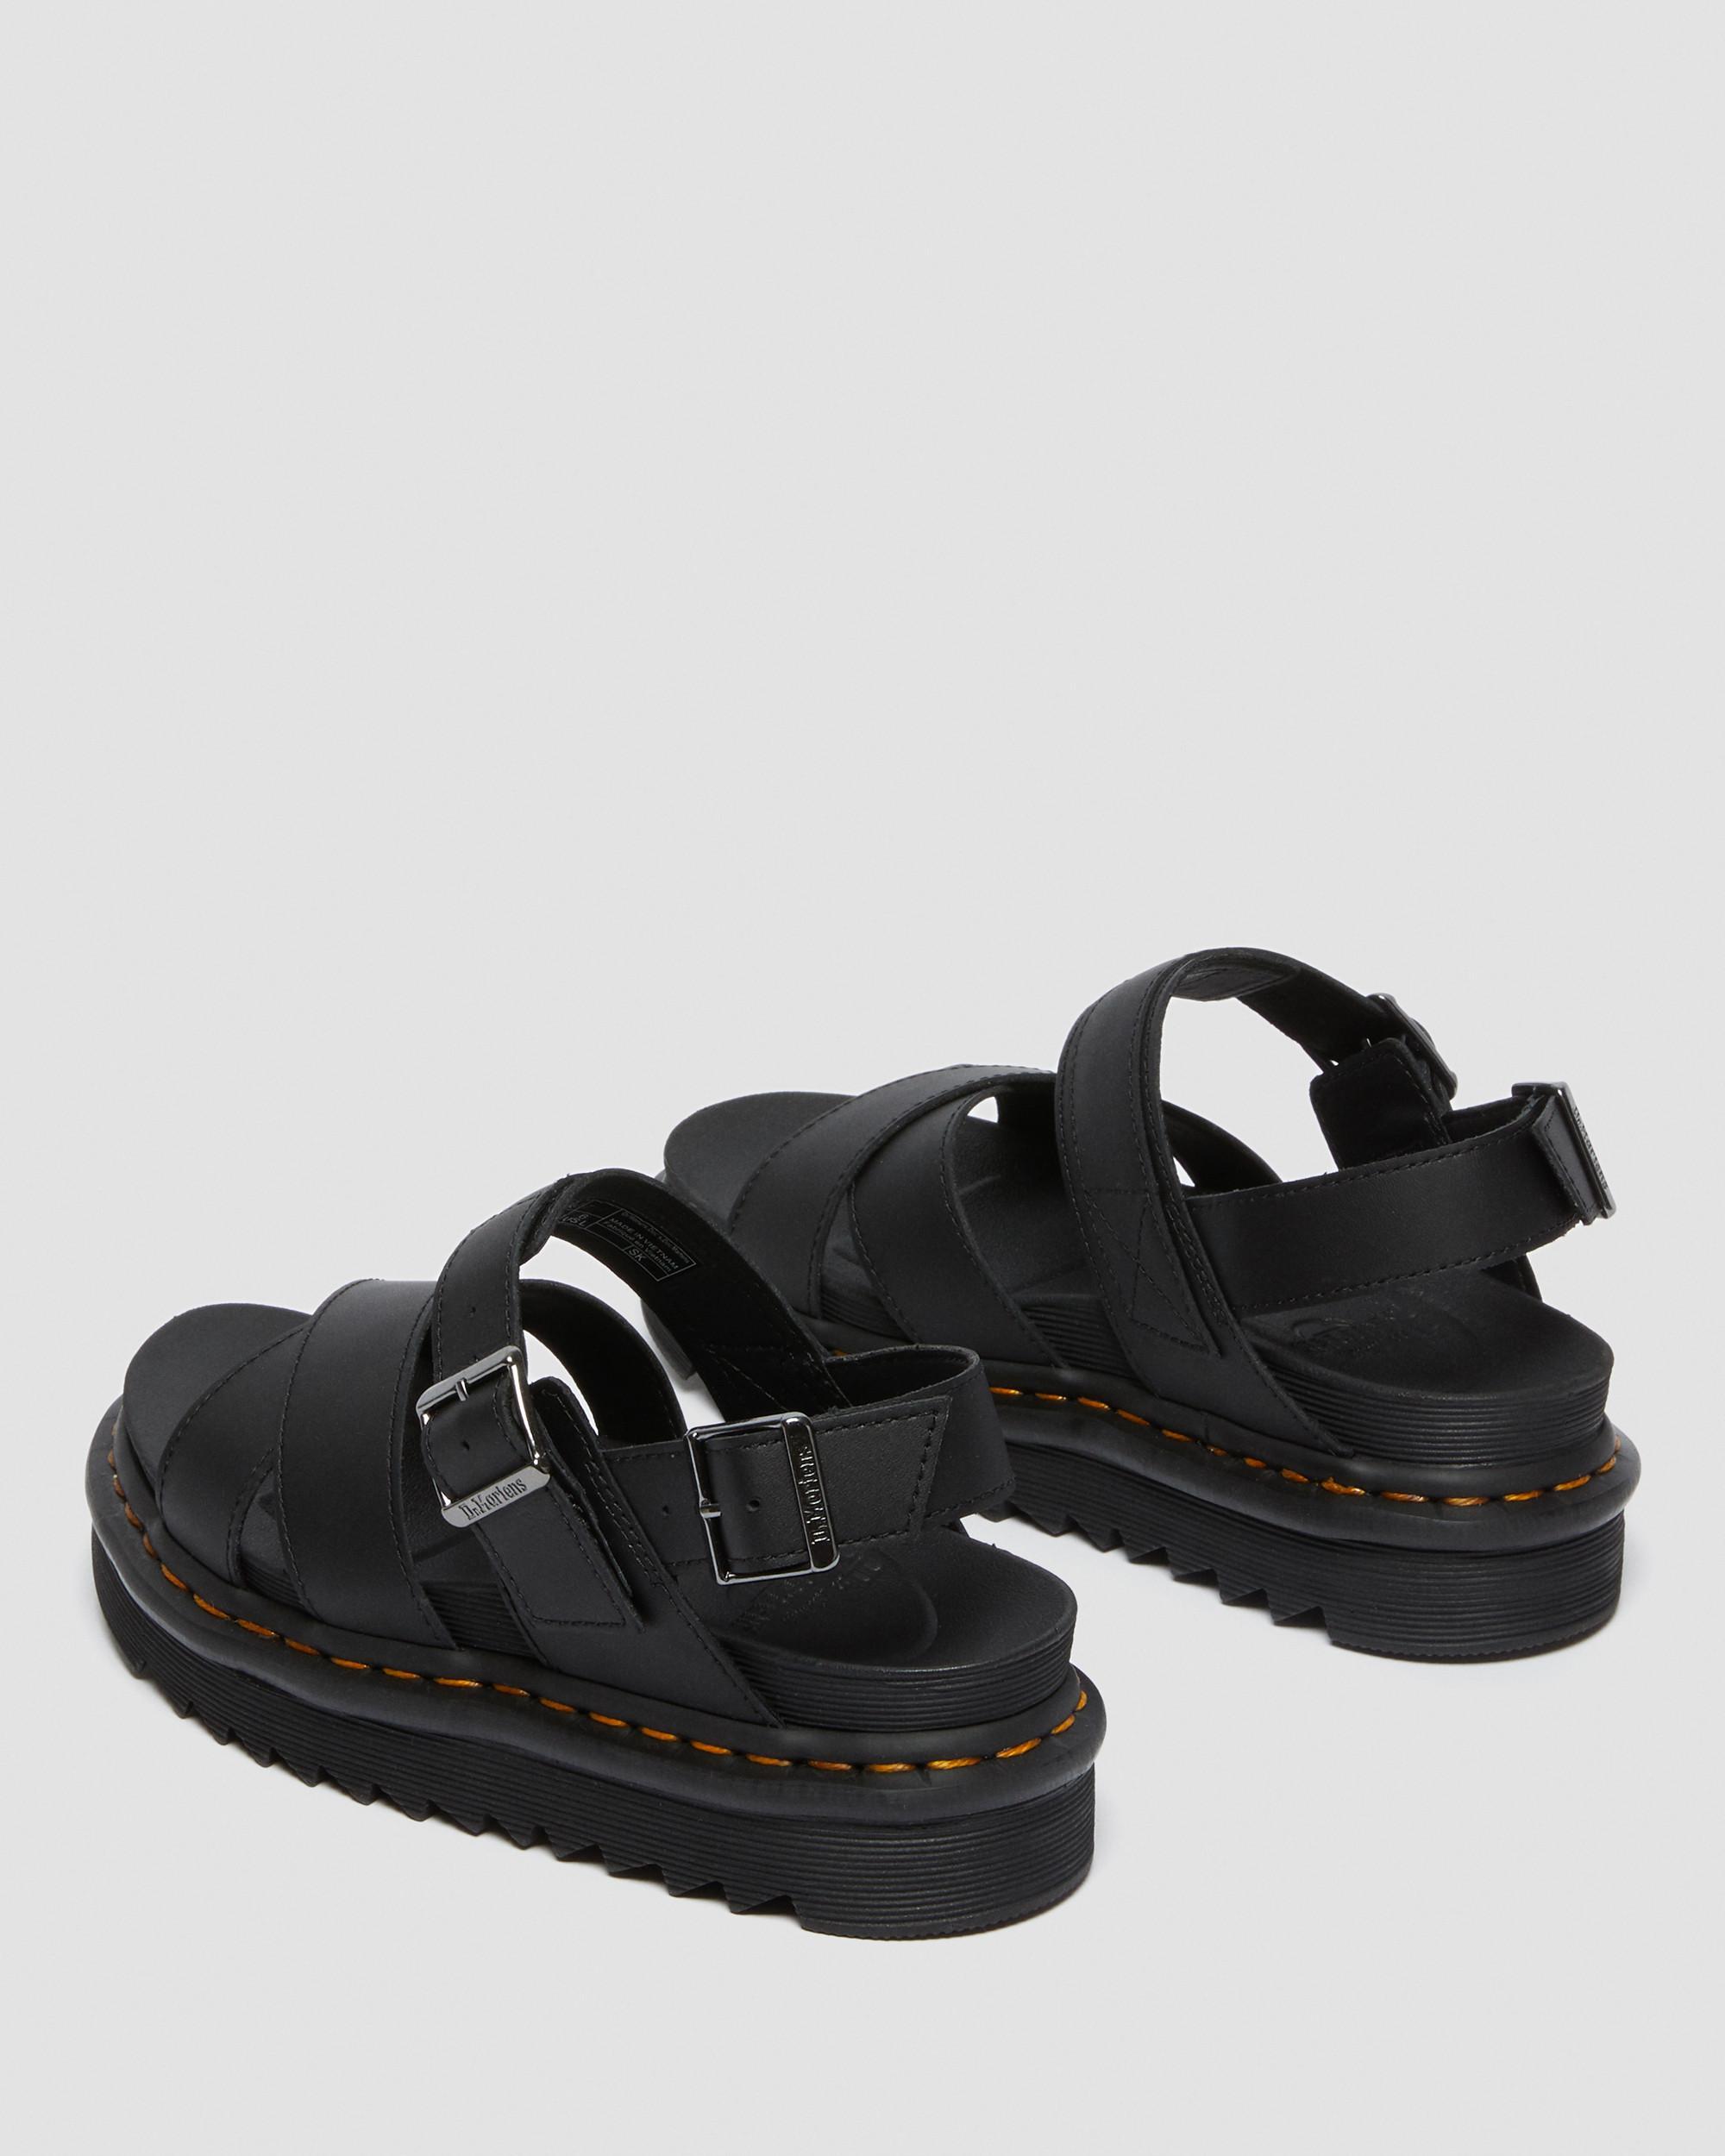 Martens Voss Leather Strap Platform Sandals White in Black Dr Womens Shoes Flats and flat shoes Flat sandals 